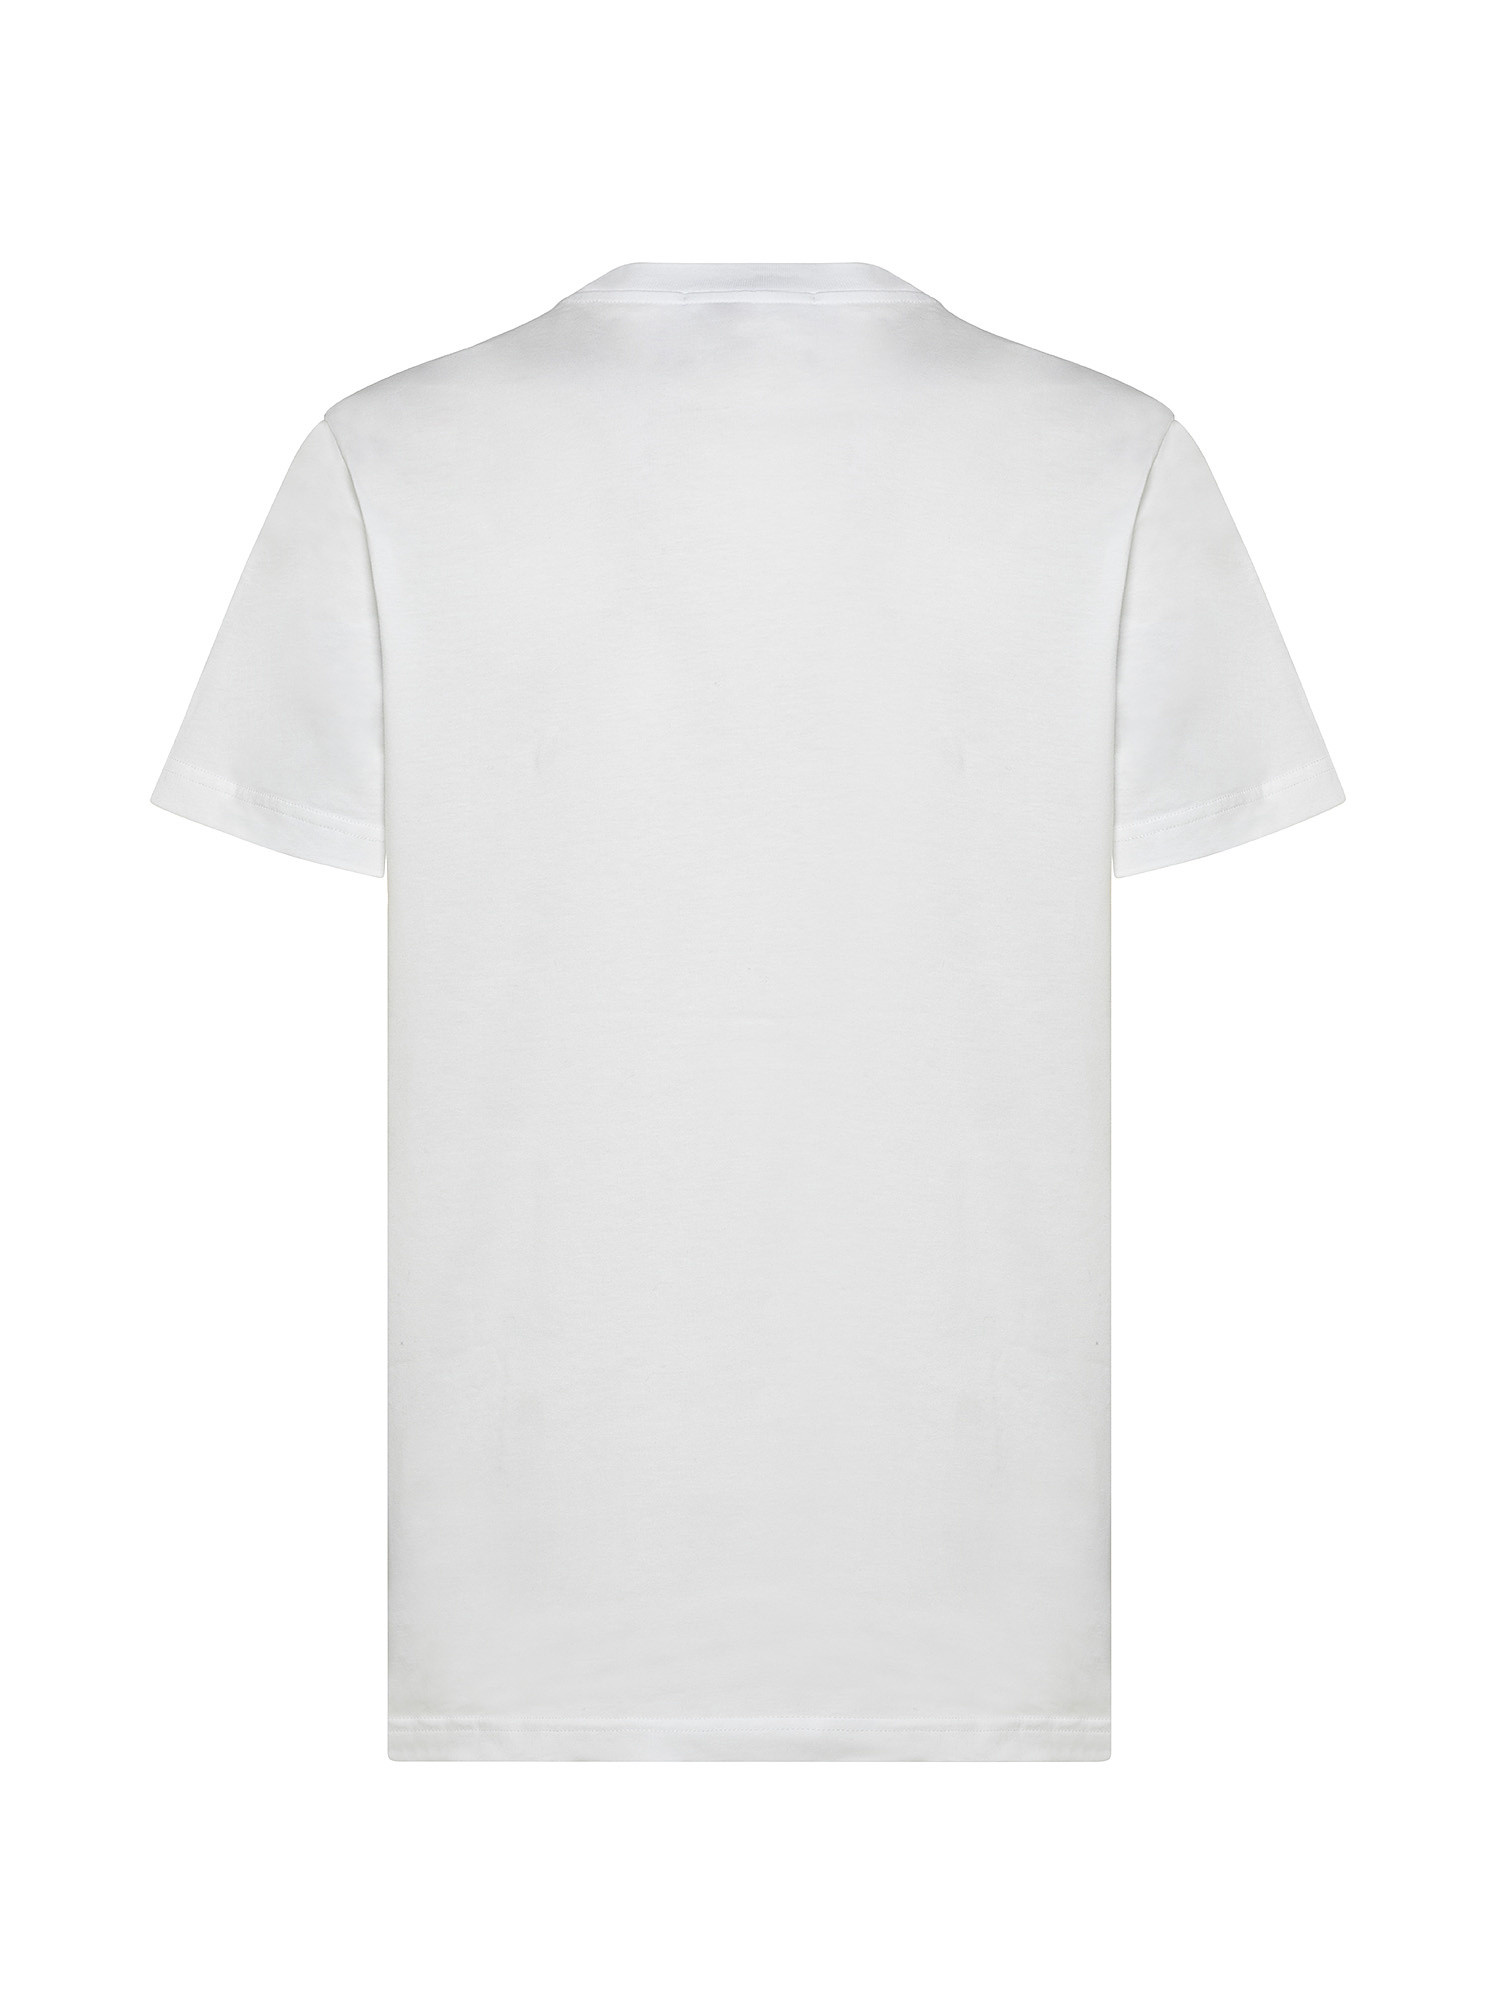 T-shirt con logo in cotone, Bianco, large image number 1